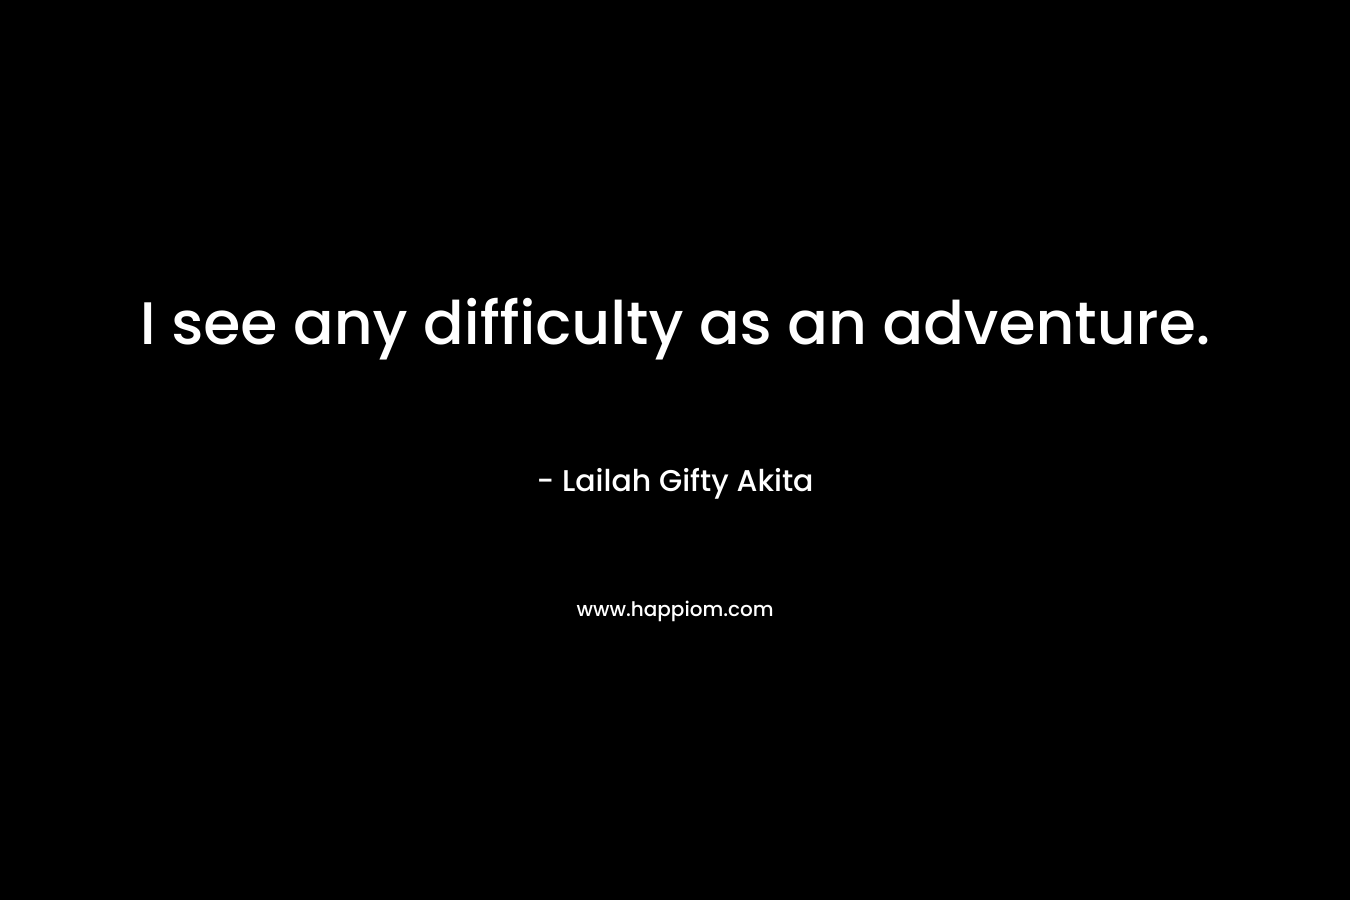 I see any difficulty as an adventure.